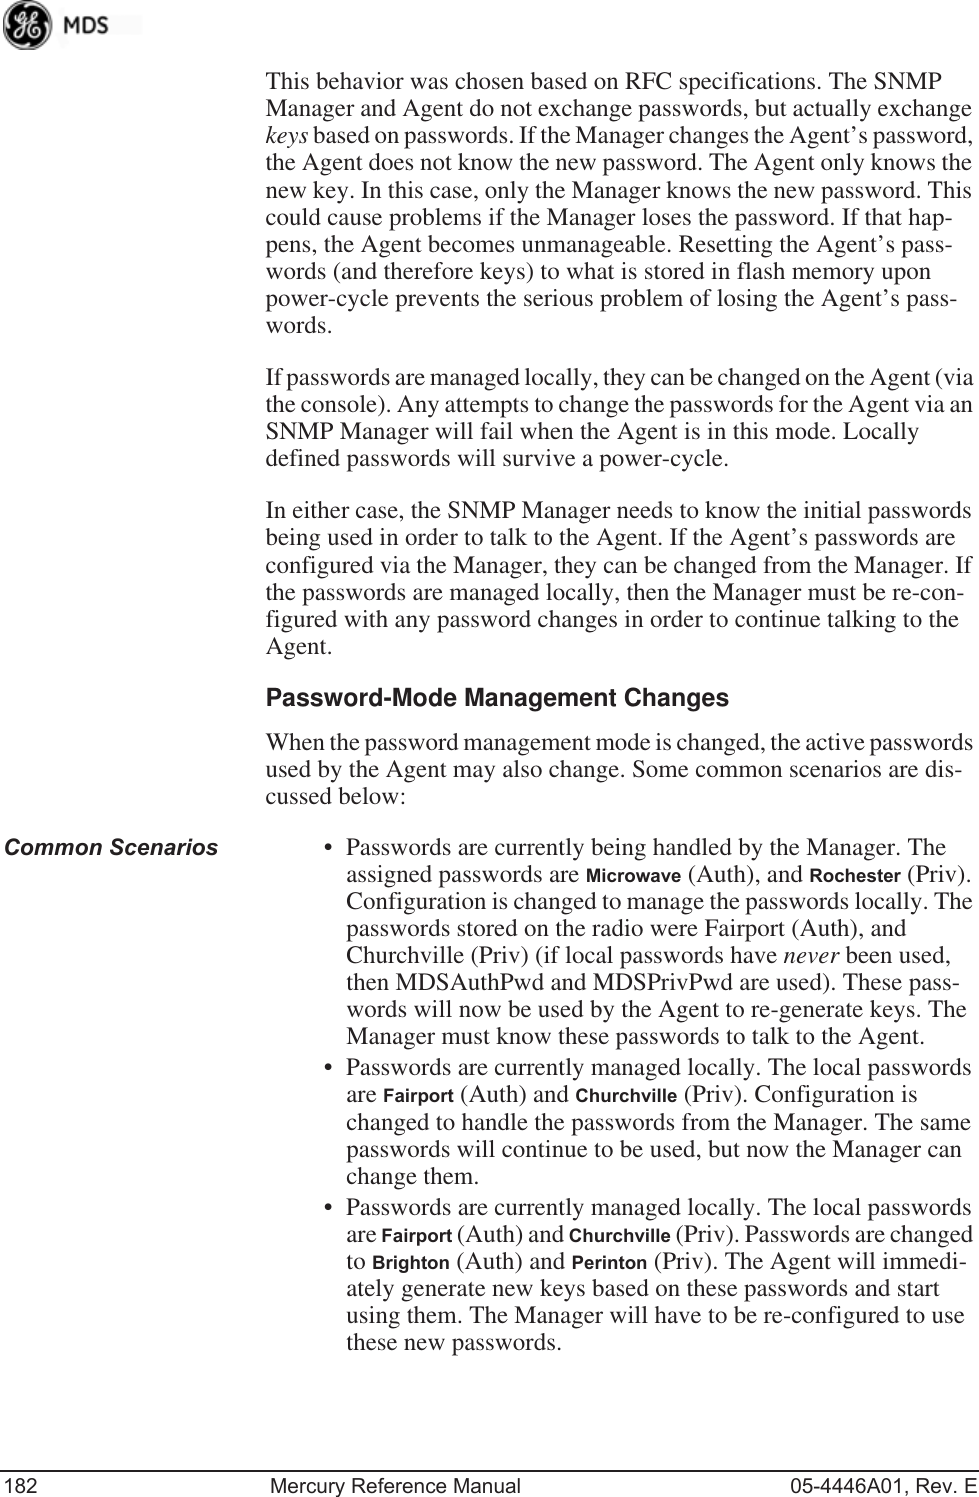 182 Mercury Reference Manual 05-4446A01, Rev. EThis behavior was chosen based on RFC specifications. The SNMP Manager and Agent do not exchange passwords, but actually exchange keys based on passwords. If the Manager changes the Agent’s password, the Agent does not know the new password. The Agent only knows the new key. In this case, only the Manager knows the new password. This could cause problems if the Manager loses the password. If that hap-pens, the Agent becomes unmanageable. Resetting the Agent’s pass-words (and therefore keys) to what is stored in flash memory upon power-cycle prevents the serious problem of losing the Agent’s pass-words.If passwords are managed locally, they can be changed on the Agent (via the console). Any attempts to change the passwords for the Agent via an SNMP Manager will fail when the Agent is in this mode. Locally defined passwords will survive a power-cycle.In either case, the SNMP Manager needs to know the initial passwords being used in order to talk to the Agent. If the Agent’s passwords are configured via the Manager, they can be changed from the Manager. If the passwords are managed locally, then the Manager must be re-con-figured with any password changes in order to continue talking to the Agent.Password-Mode Management ChangesWhen the password management mode is changed, the active passwords used by the Agent may also change. Some common scenarios are dis-cussed below:Common Scenarios • Passwords are currently being handled by the Manager. The assigned passwords are Microwave (Auth), and Rochester (Priv). Configuration is changed to manage the passwords locally. The passwords stored on the radio were Fairport (Auth), and Churchville (Priv) (if local passwords have never been used, then MDSAuthPwd and MDSPrivPwd are used). These pass-words will now be used by the Agent to re-generate keys. The Manager must know these passwords to talk to the Agent.• Passwords are currently managed locally. The local passwords are Fairport (Auth) and Churchville (Priv). Configuration is changed to handle the passwords from the Manager. The same passwords will continue to be used, but now the Manager can change them.• Passwords are currently managed locally. The local passwords are Fairport (Auth) and Churchville (Priv). Passwords are changed to Brighton (Auth) and Perinton (Priv). The Agent will immedi-ately generate new keys based on these passwords and start using them. The Manager will have to be re-configured to use these new passwords.